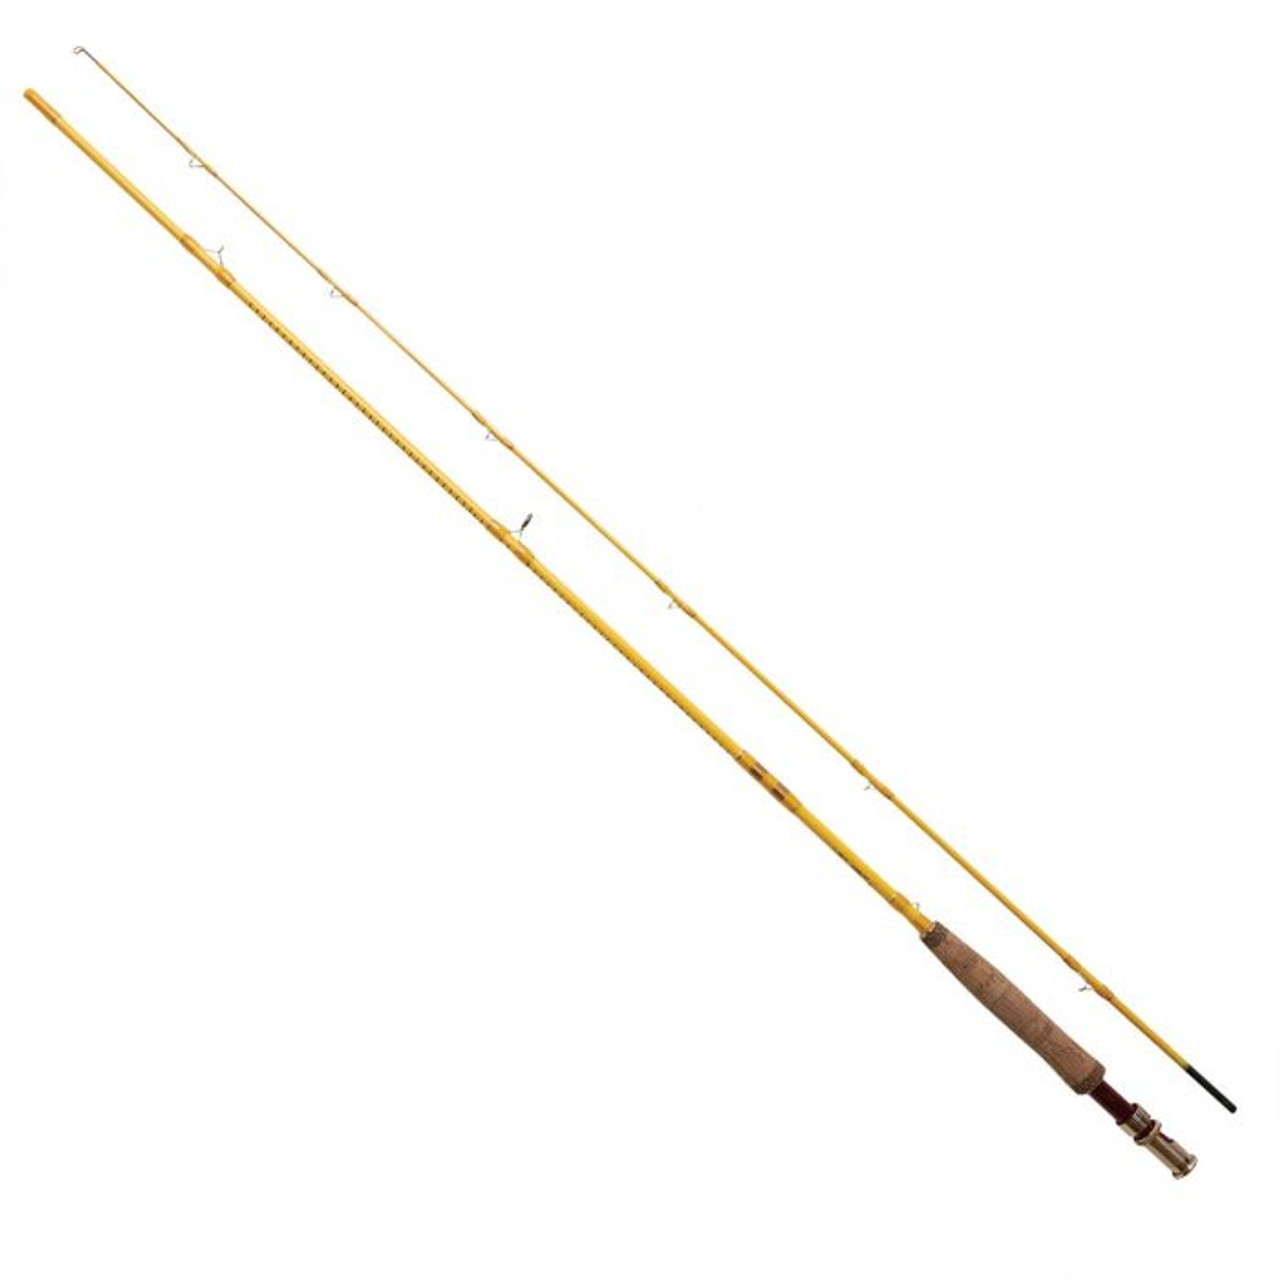 Eagle Claw Featherlight 3/4 Line Weight Fly Rod, 2 Piece, Yellow, 6-Feet 6-Inch, 4/5 weight